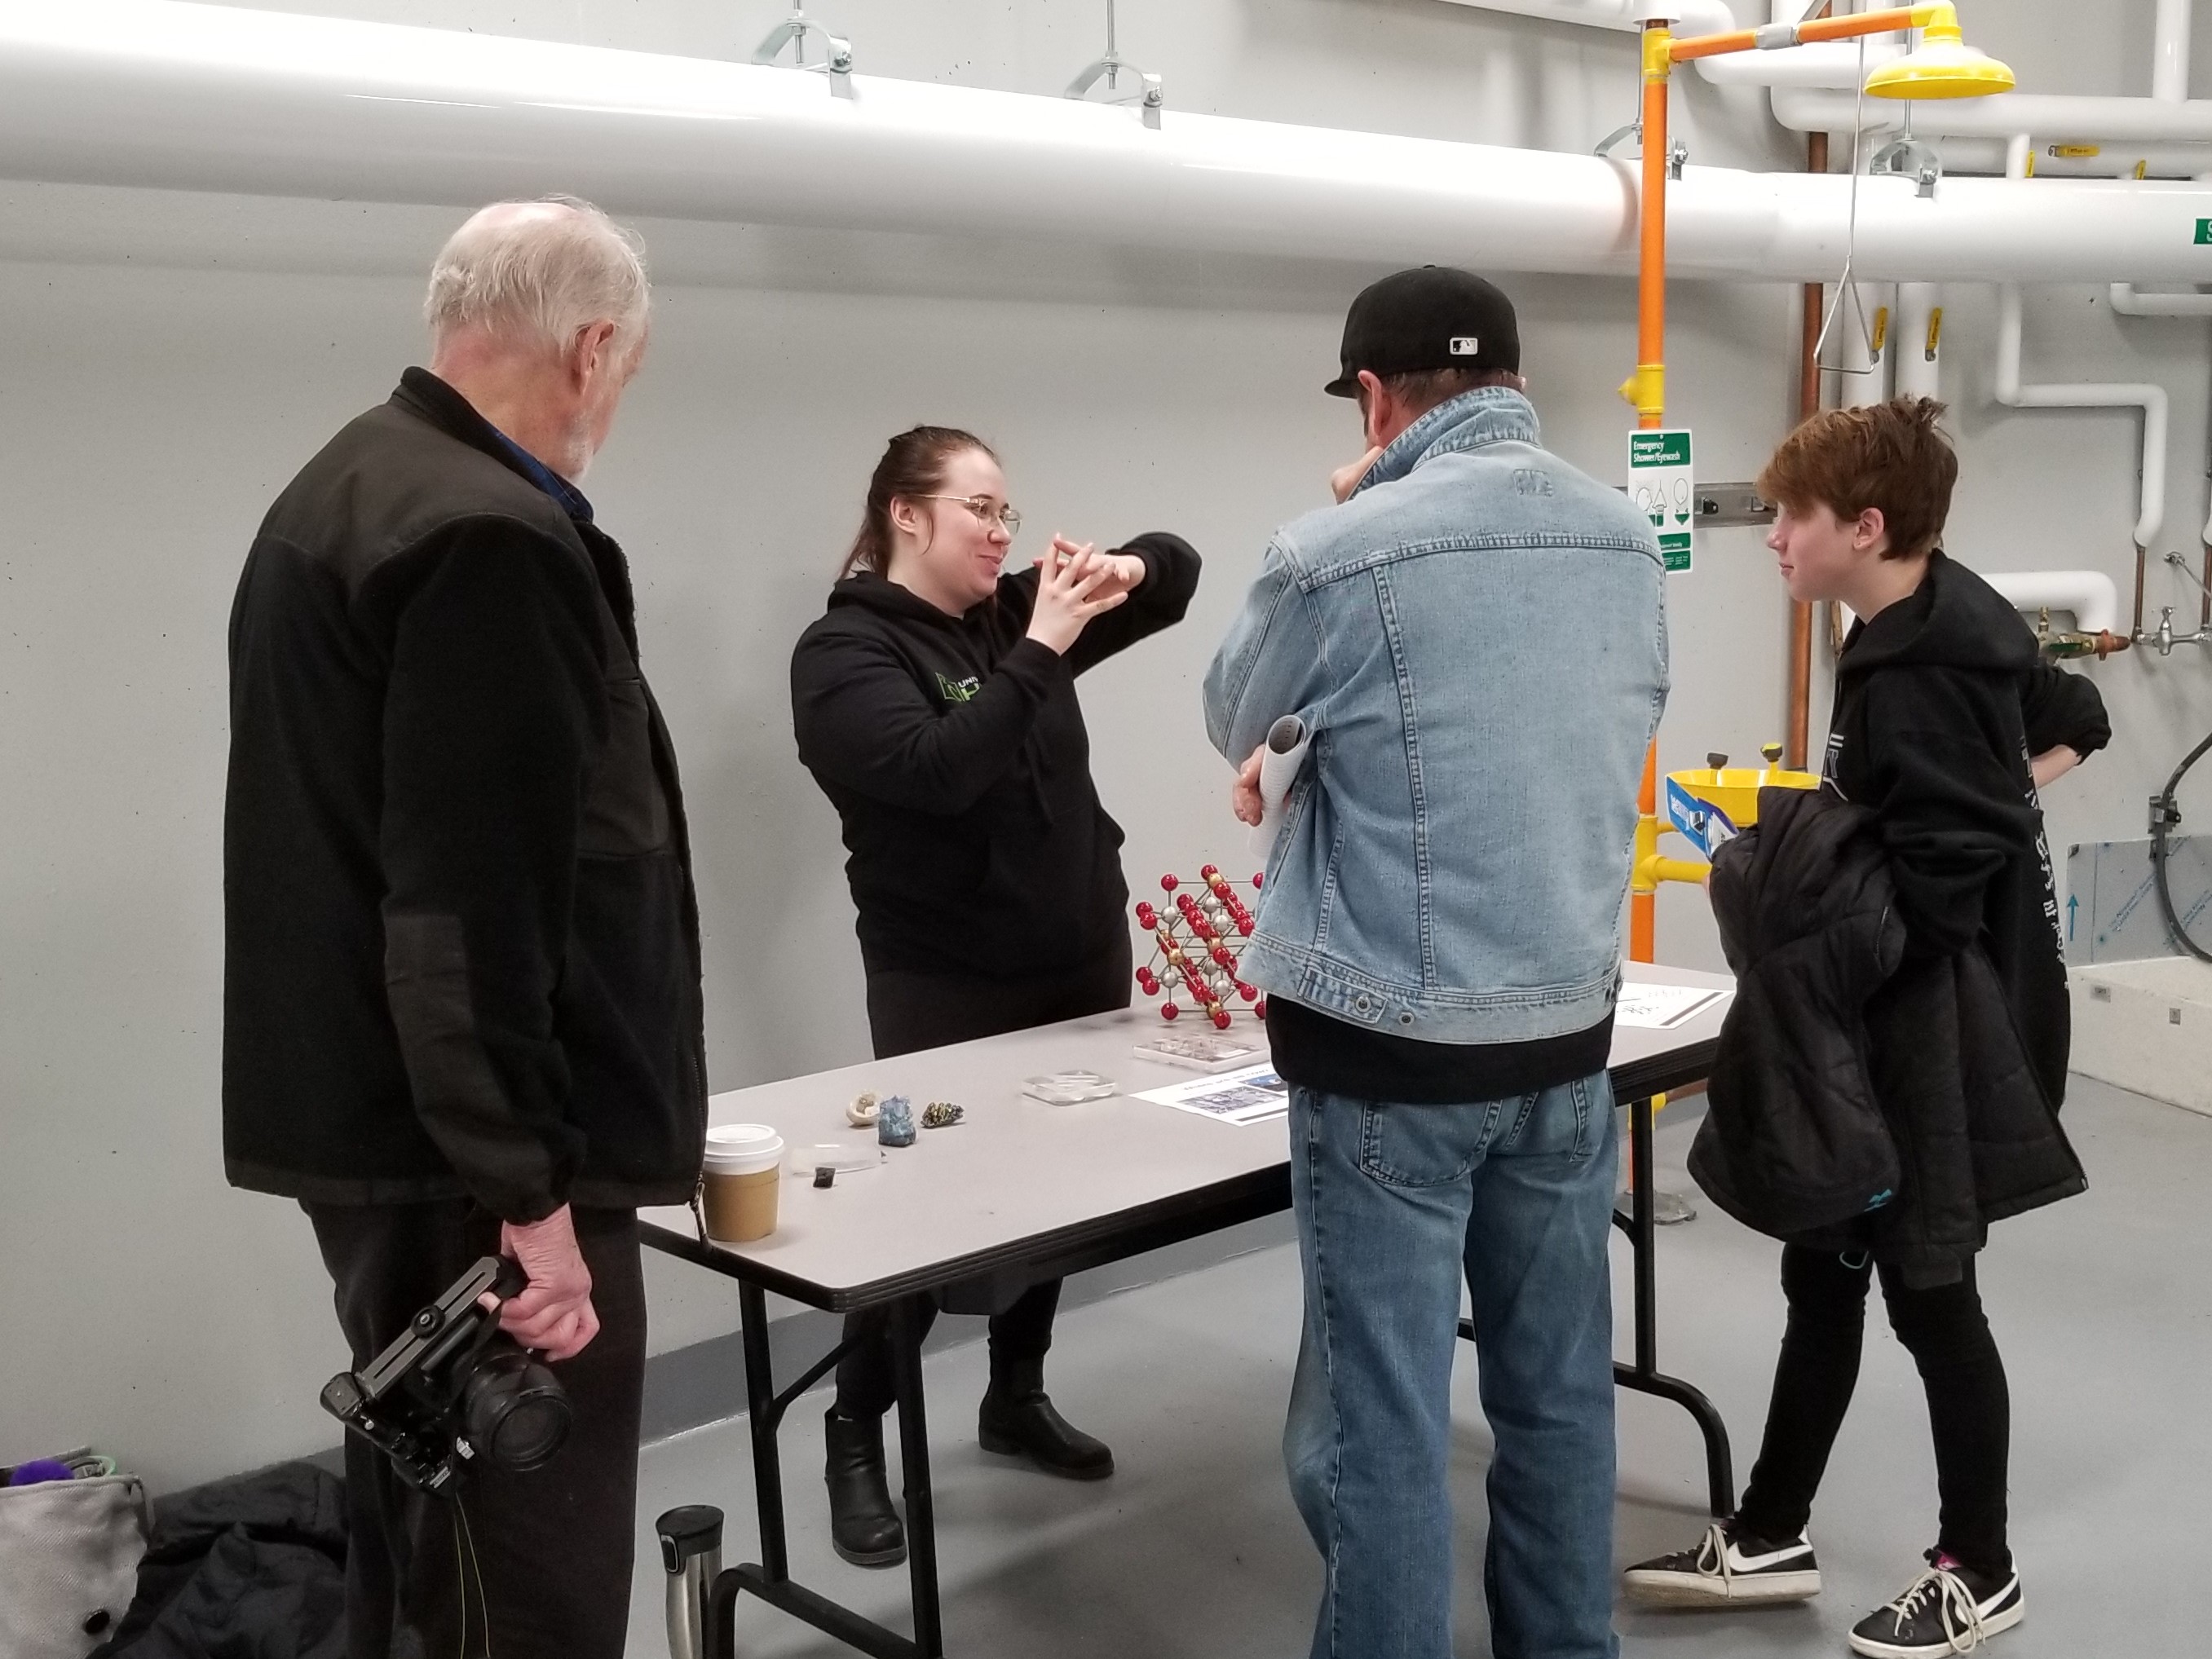 A researcher discusses an atom model with three visitors. 